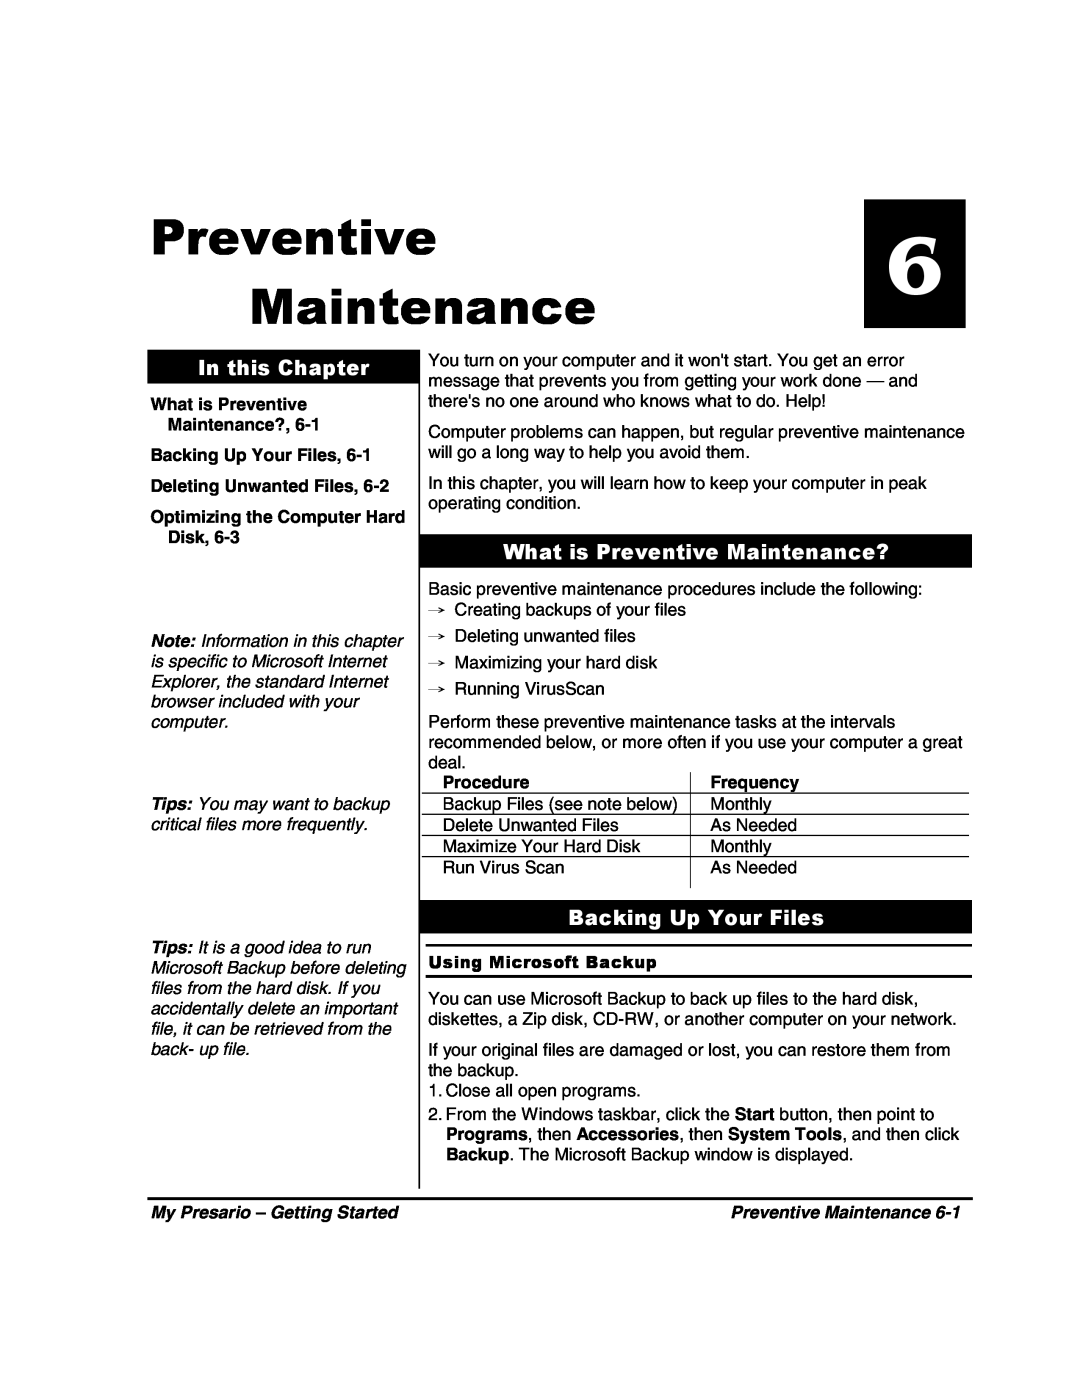 HP 80XL302 manual What is Preventive Maintenance?, Backing Up Your Files, In this Chapter, Procedure, Frequency 